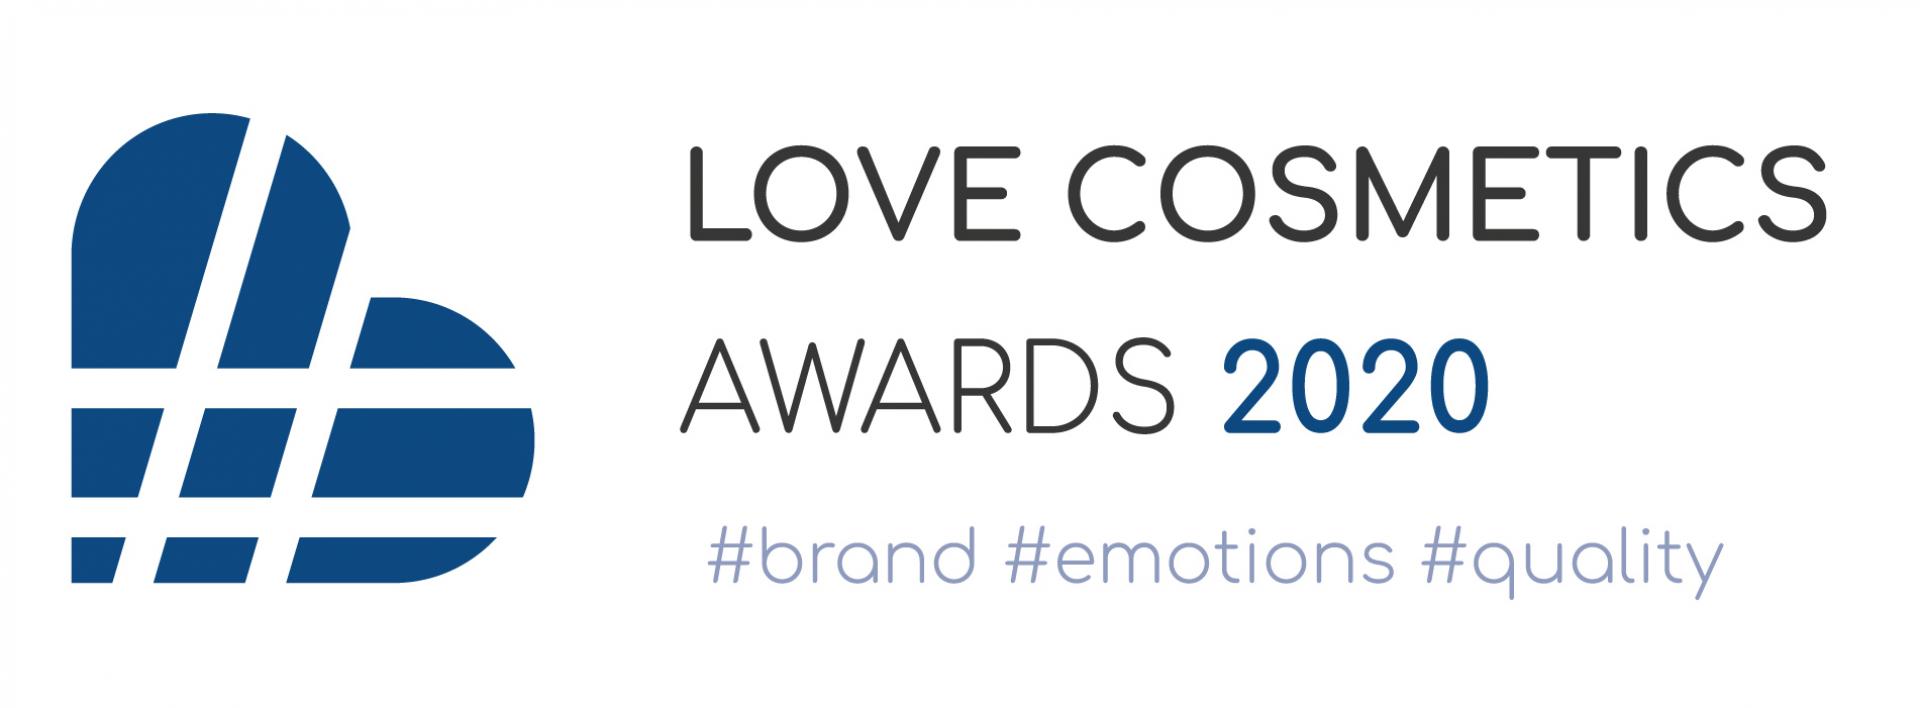 Love Cosmetics Awards 2020 – Show Must Go On…